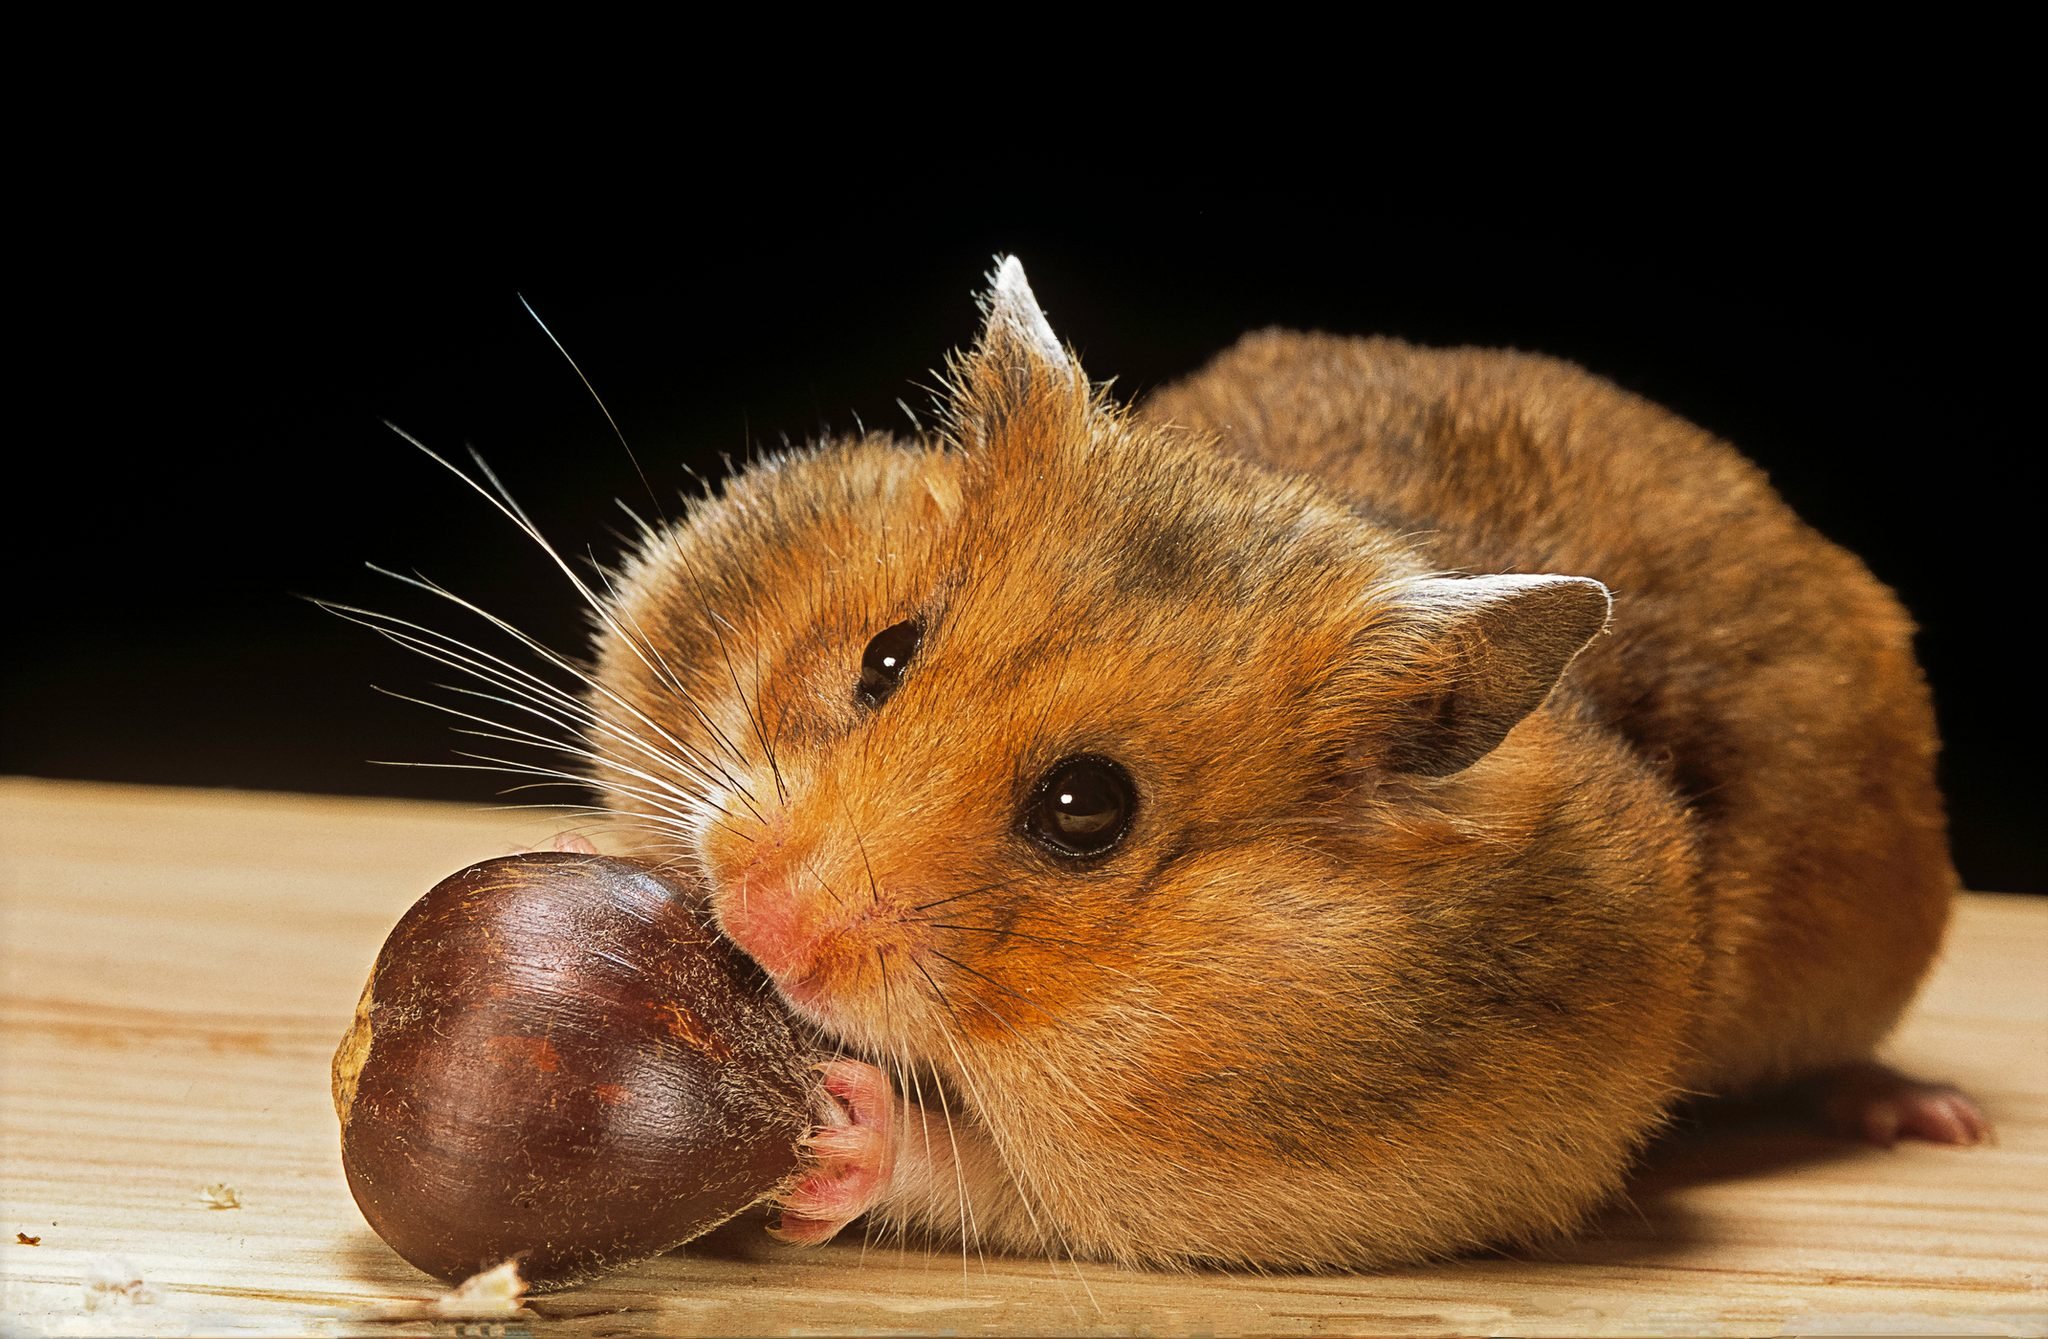 A chubby hamster eating a brown chestnut as part of a healthy nutritional diet.